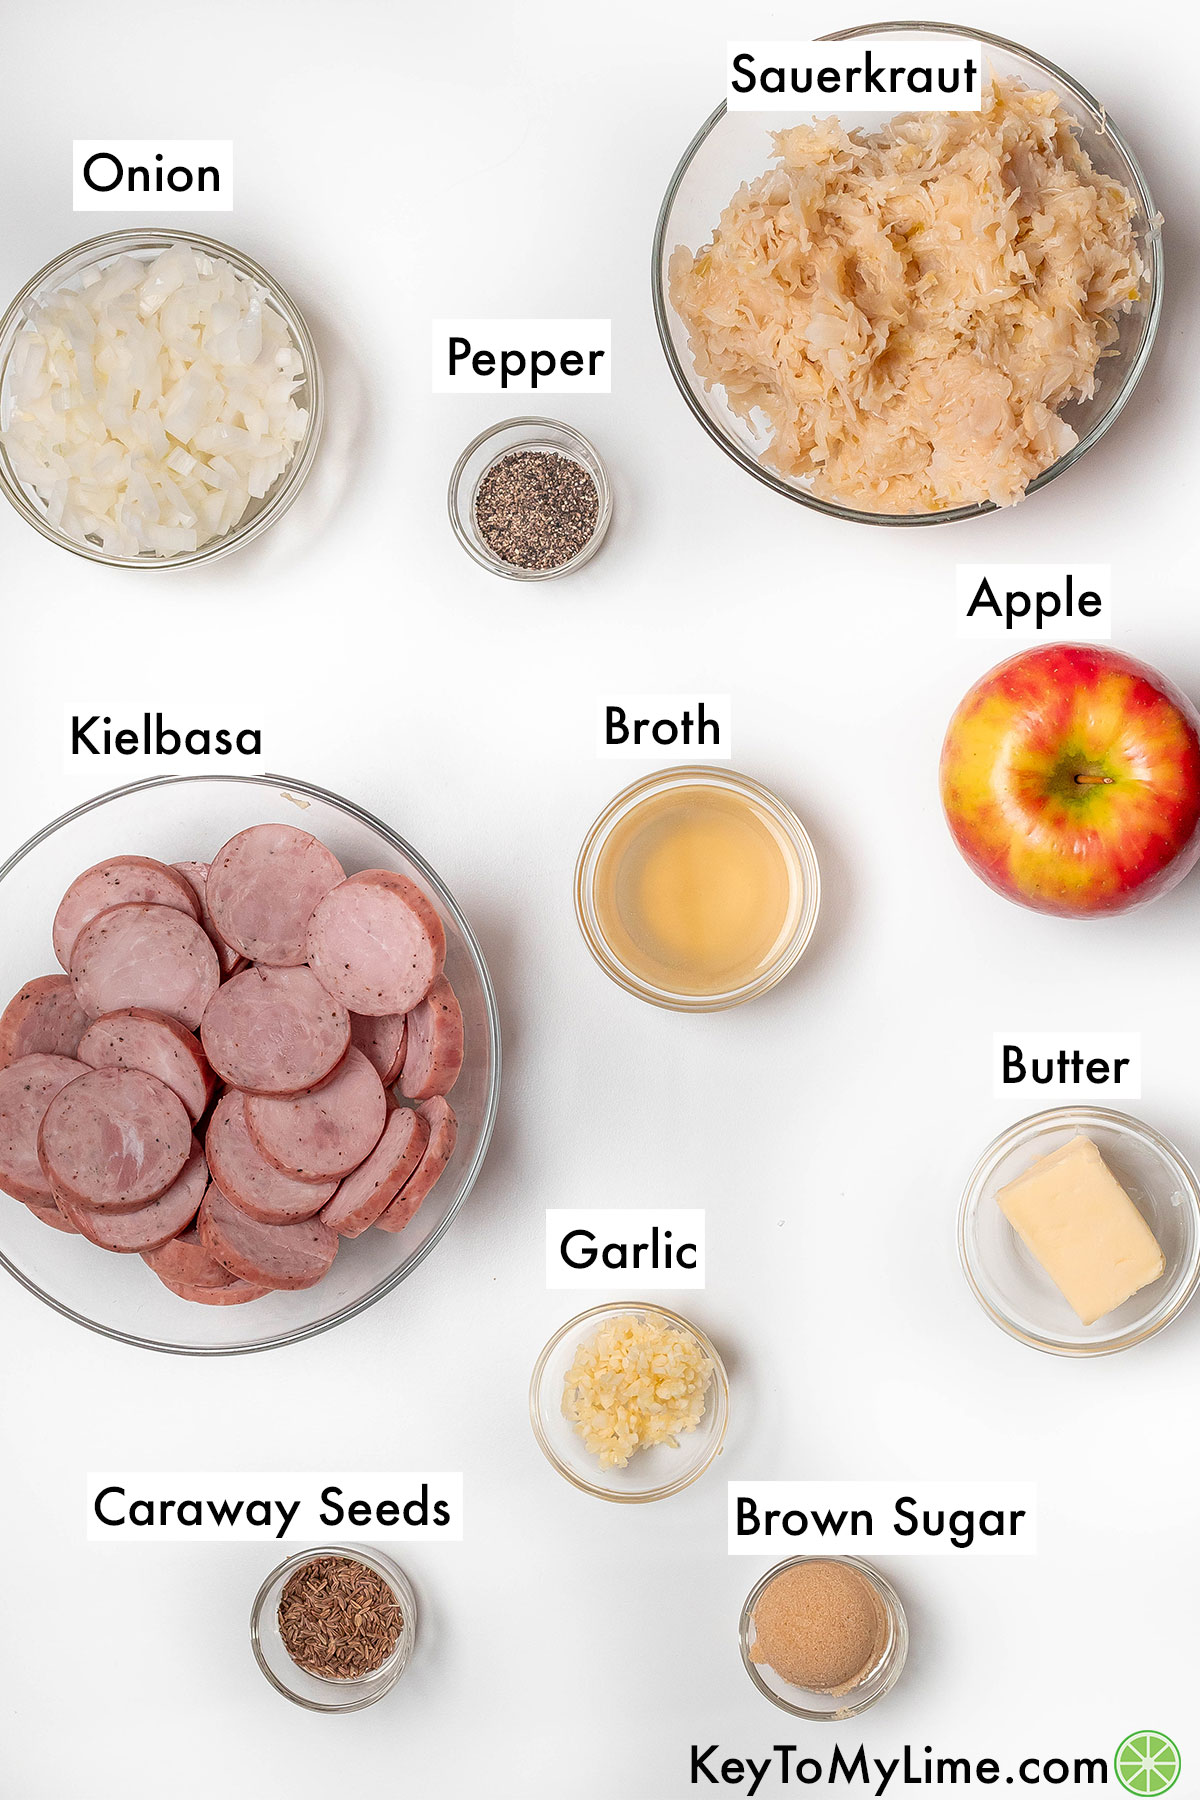 The labeled ingredients for kielbasa and sauerkraut.